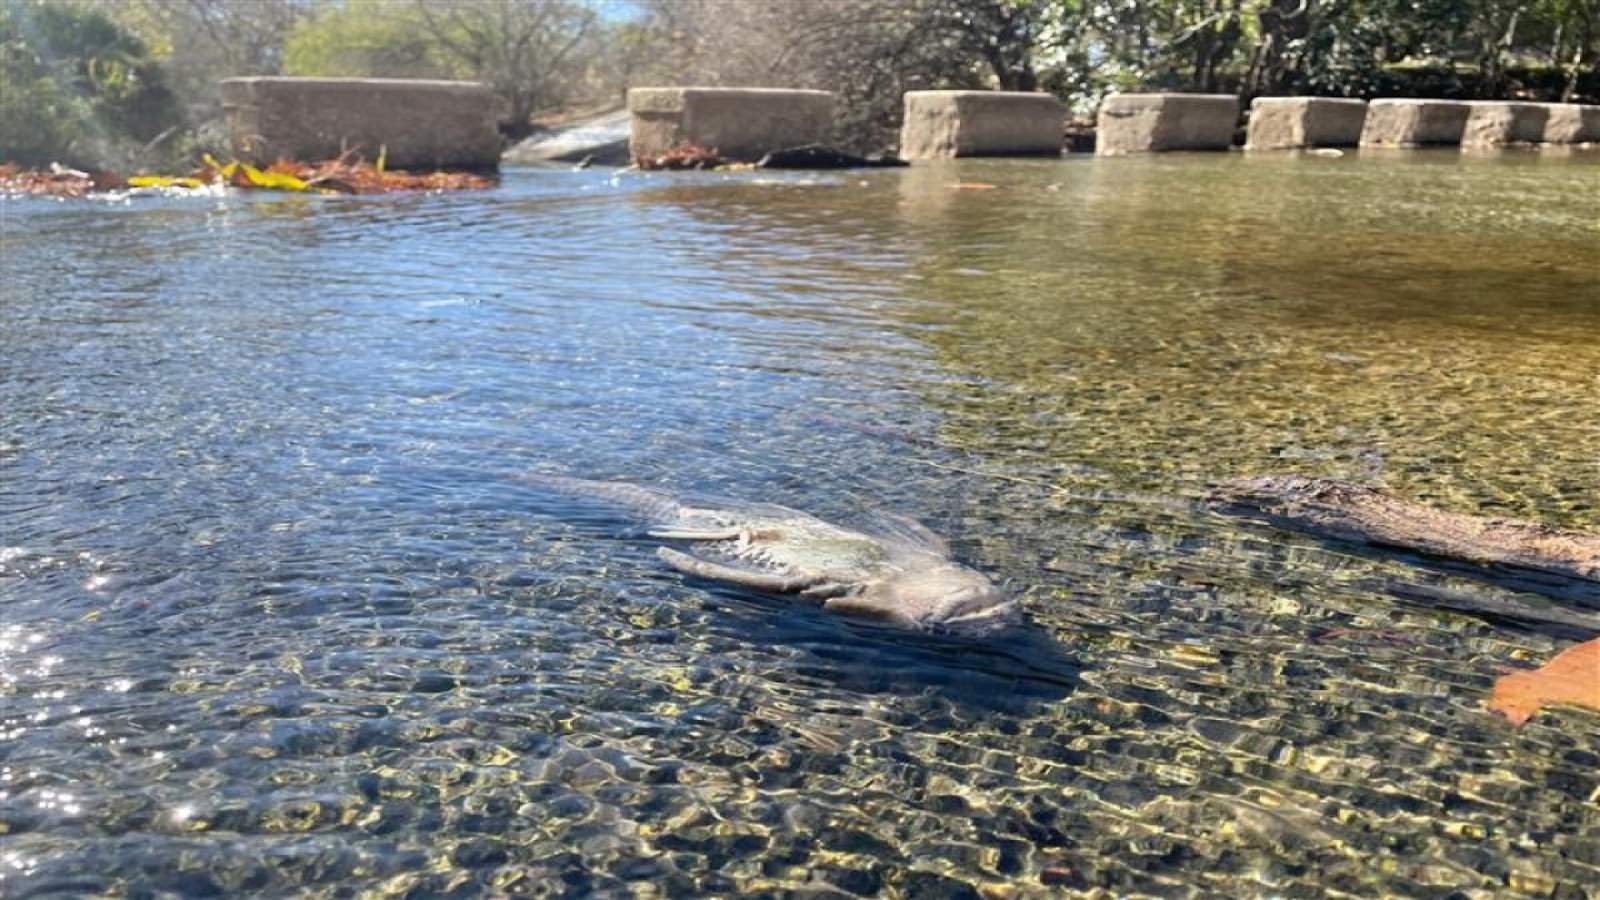 Fish found dead along San Antonio River, Texas coast after freezing weather event